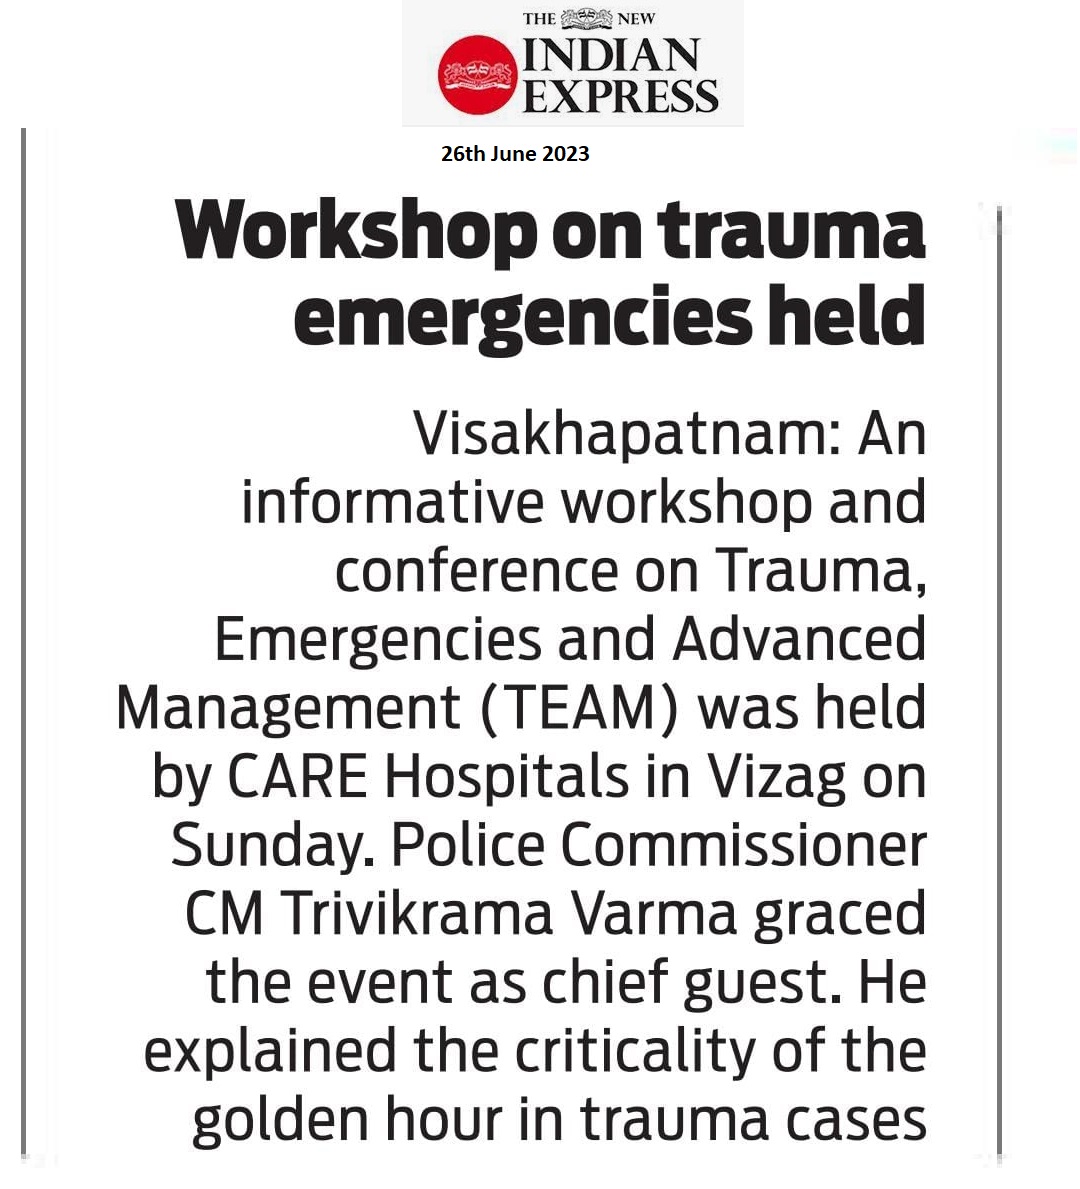 Workshop on Trauma Emergency by CARE Hospitals Visakhapatnam News Coverage in The New Indian Express 